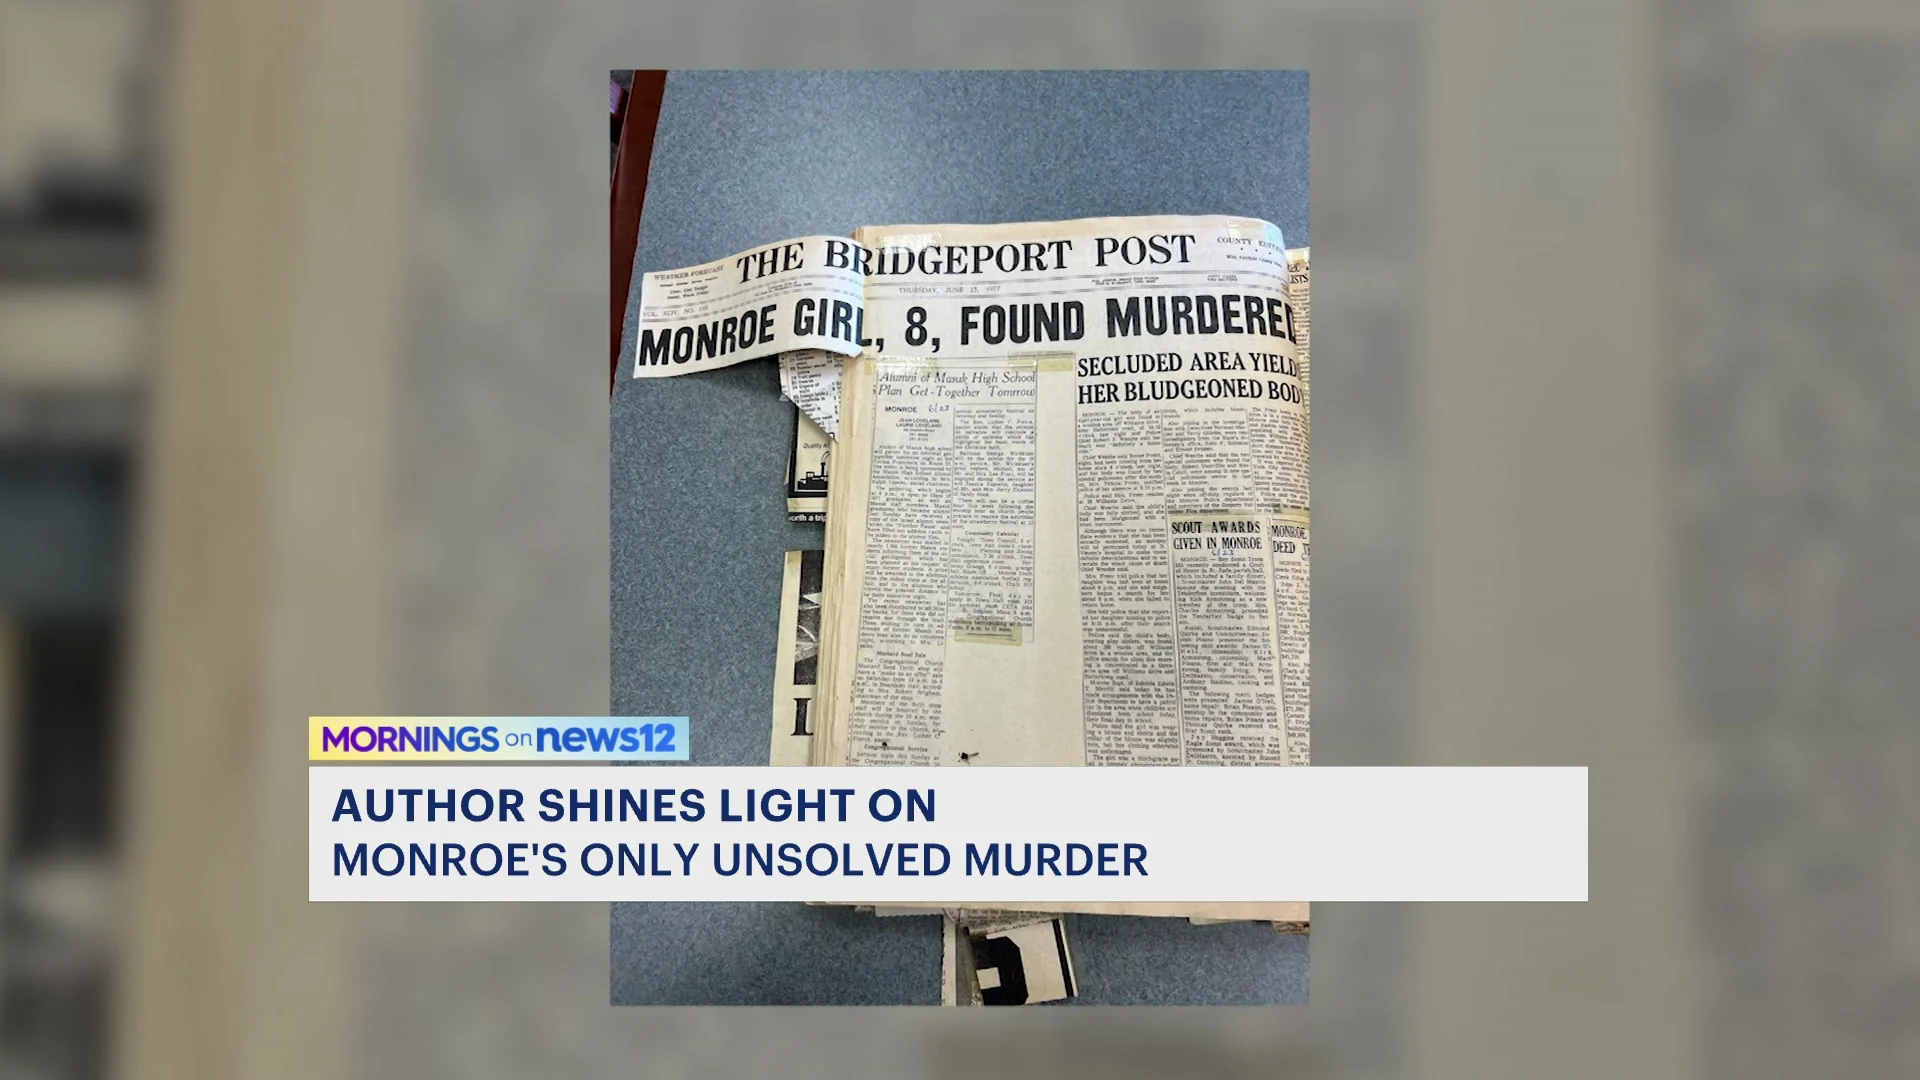 Local author shines light on Monroe’s only unsolved murder case